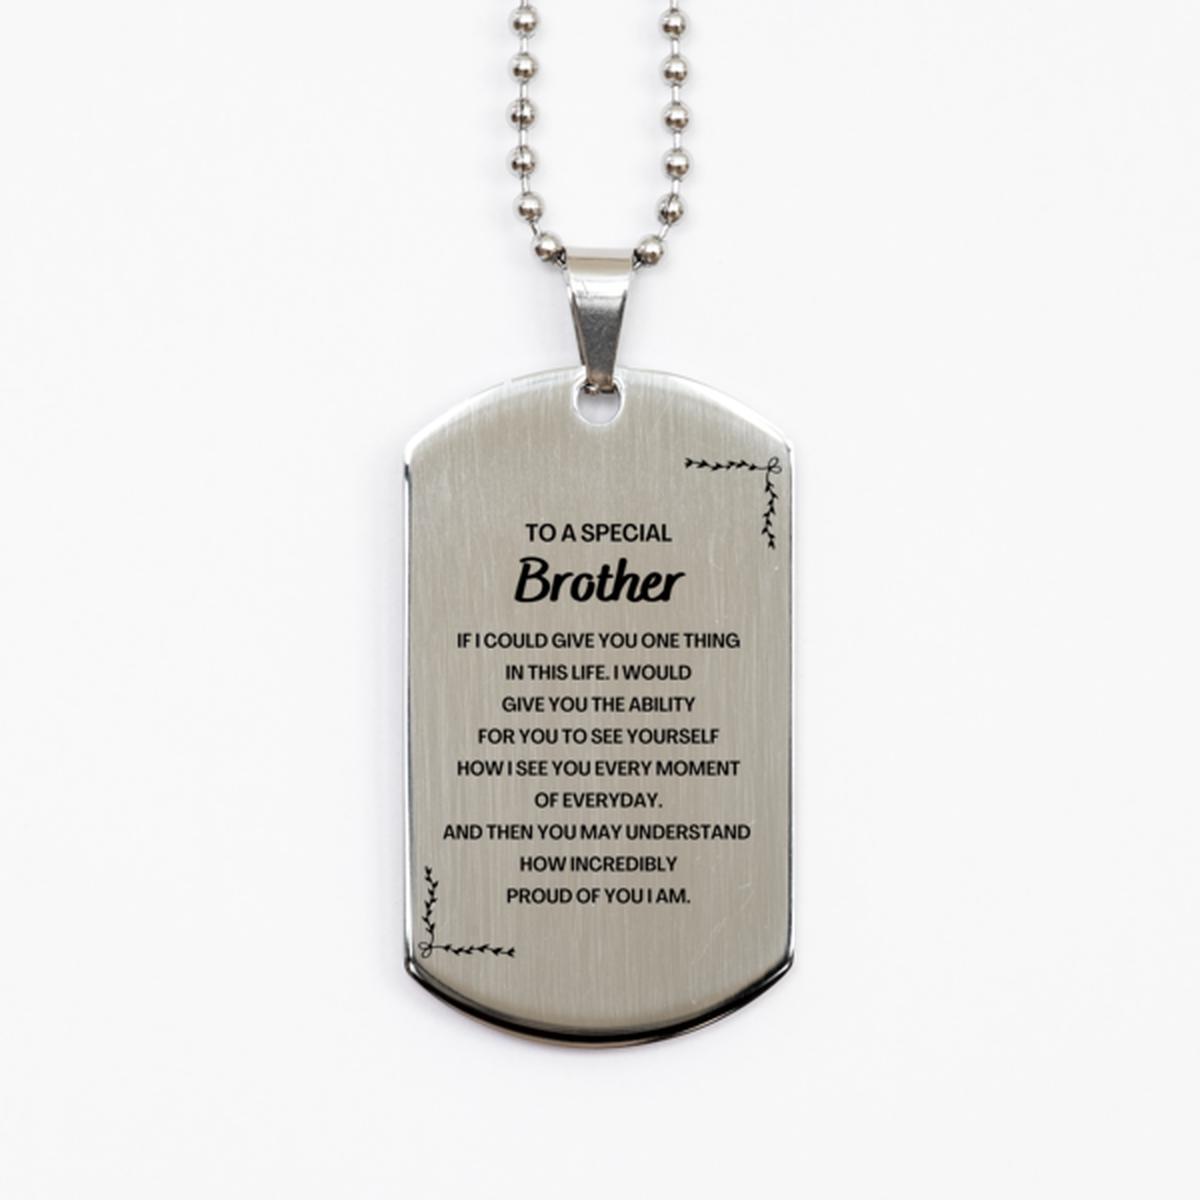 To My Brother Silver Dog Tag, Gifts For Brother Engraved, Inspirational Gifts for Christmas Birthday, Epic Gifts for Brother To A Special Brother how incredibly proud of you I am